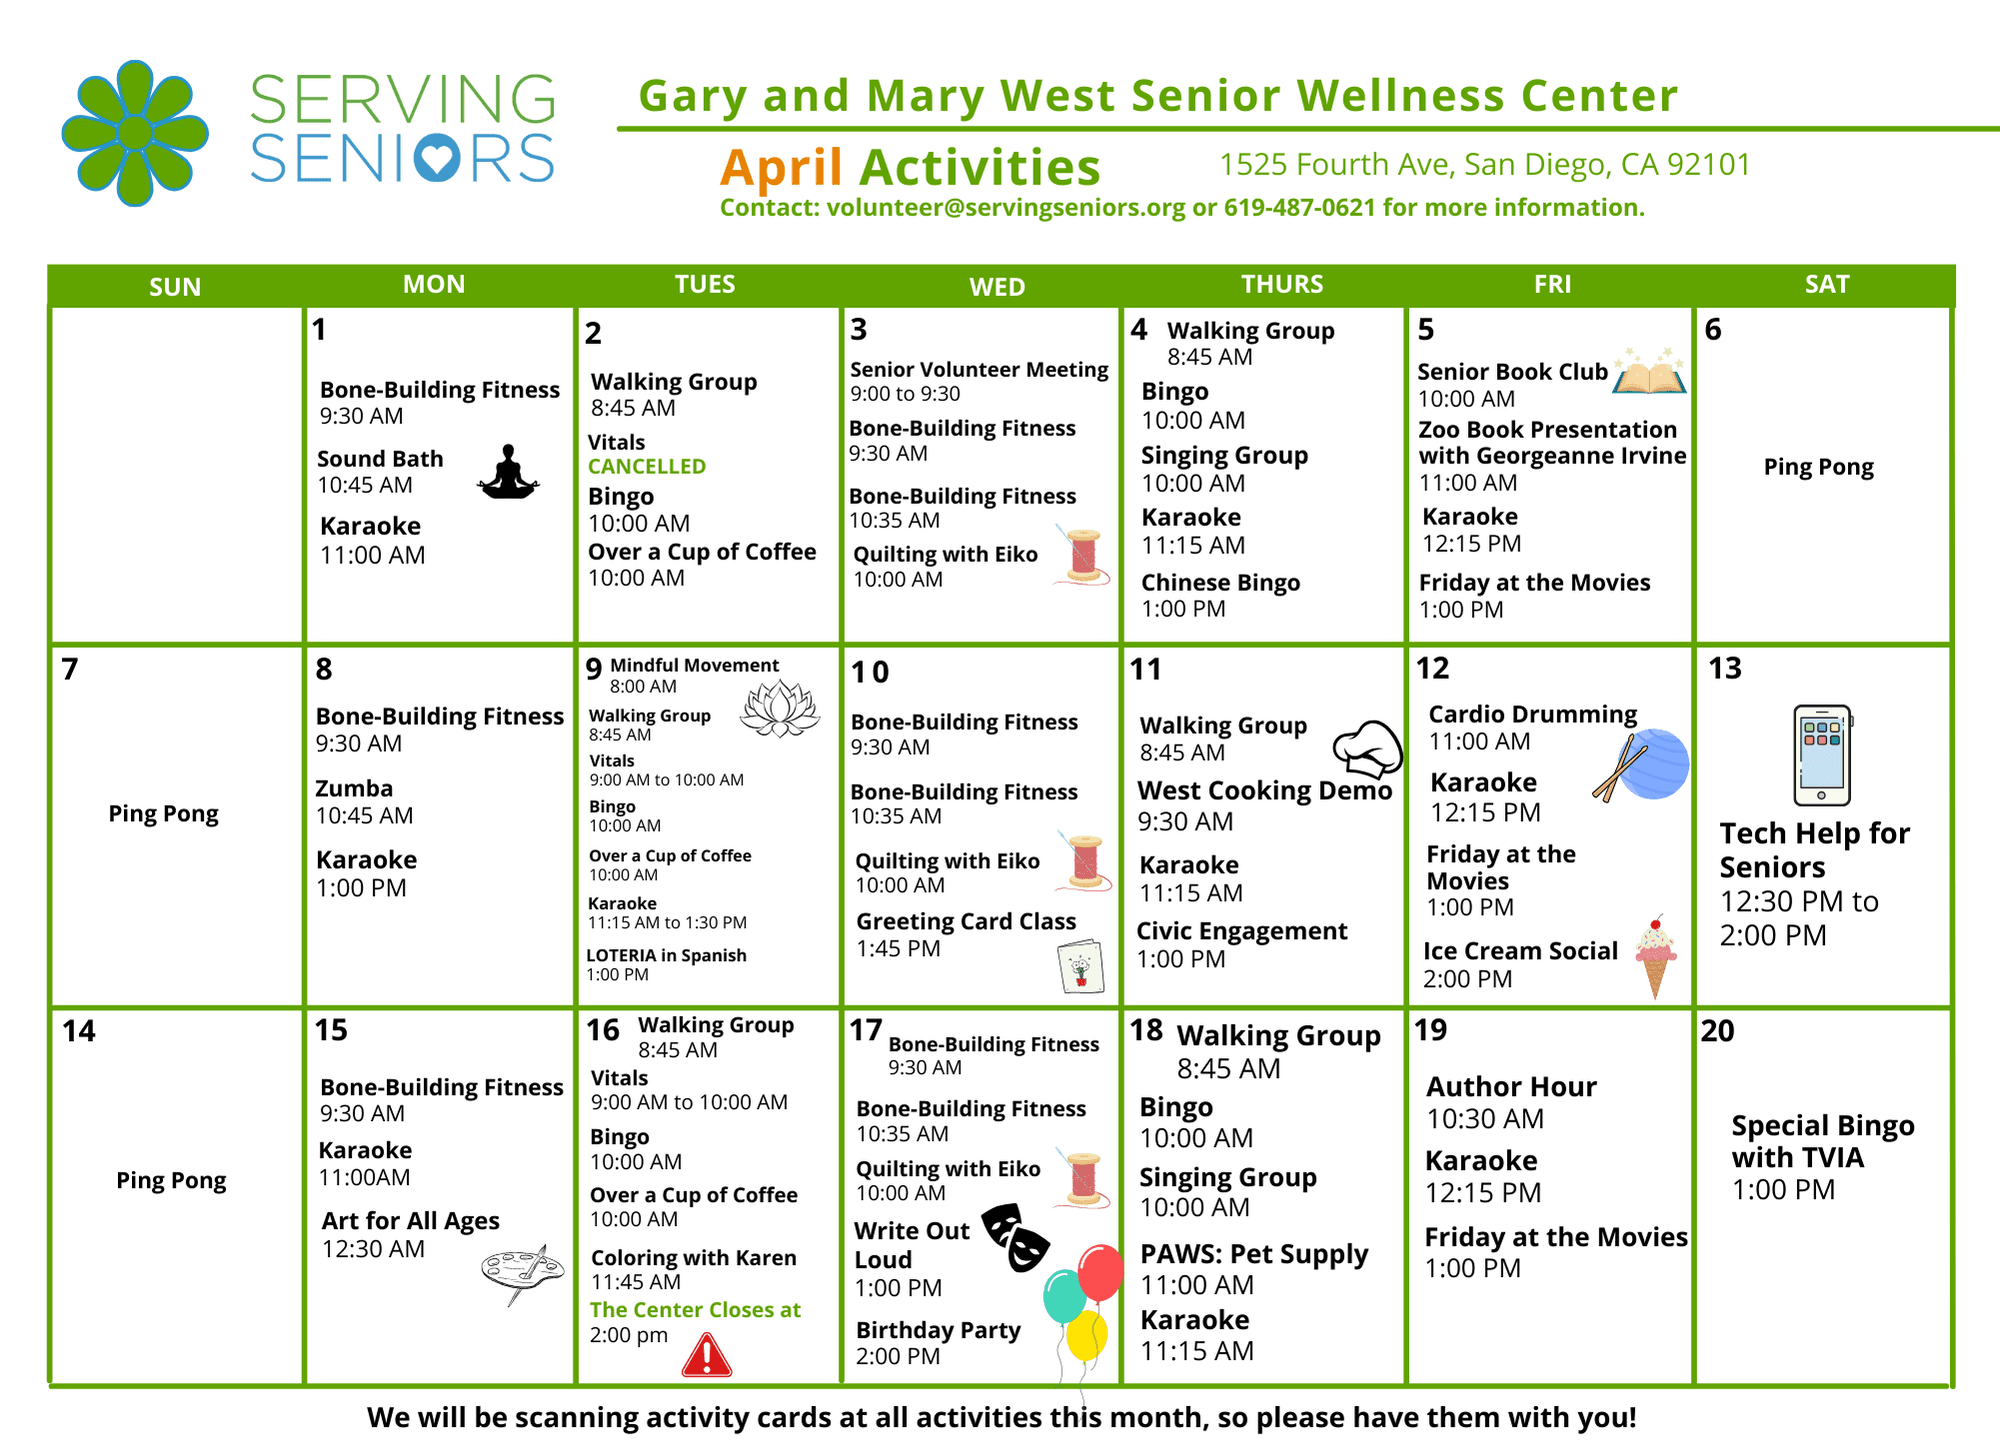 Click to download the Gary and Mary West Senior Wellness Center April Activities Calendar